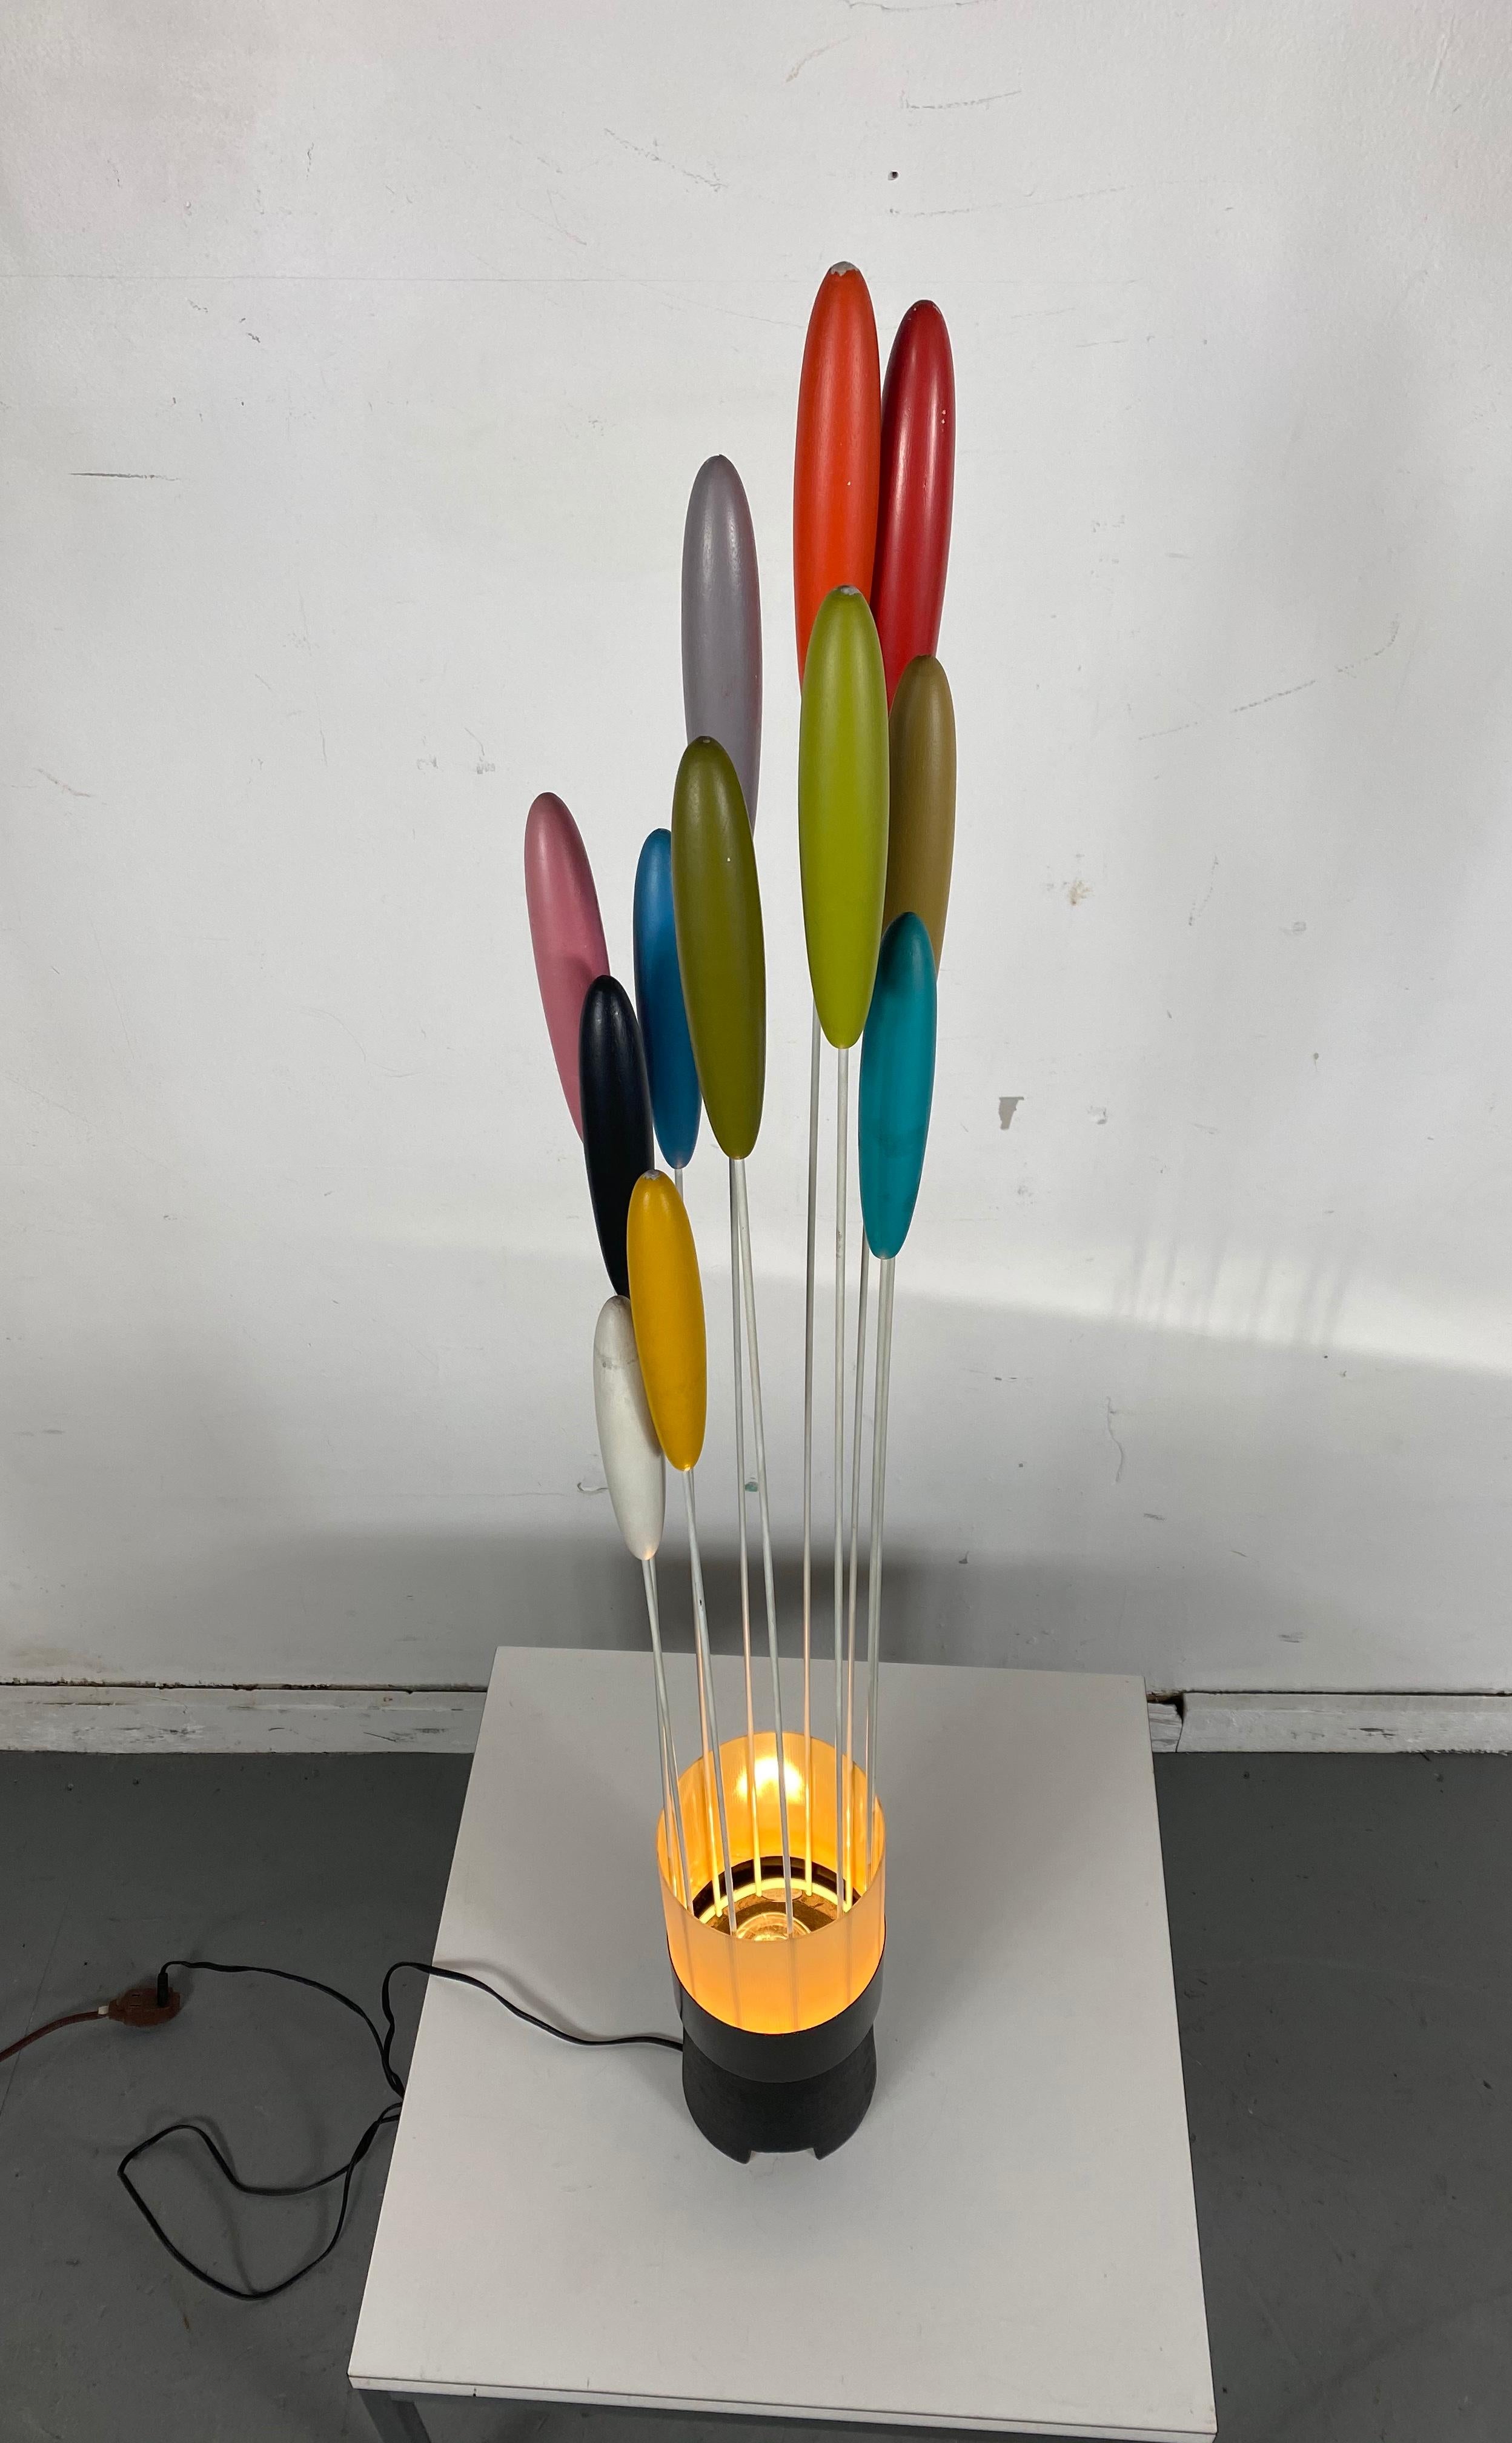 Mid-20th Century Bill Curry 'Cattails' Lamp.. Iconic Modernist Design, , amazing colors